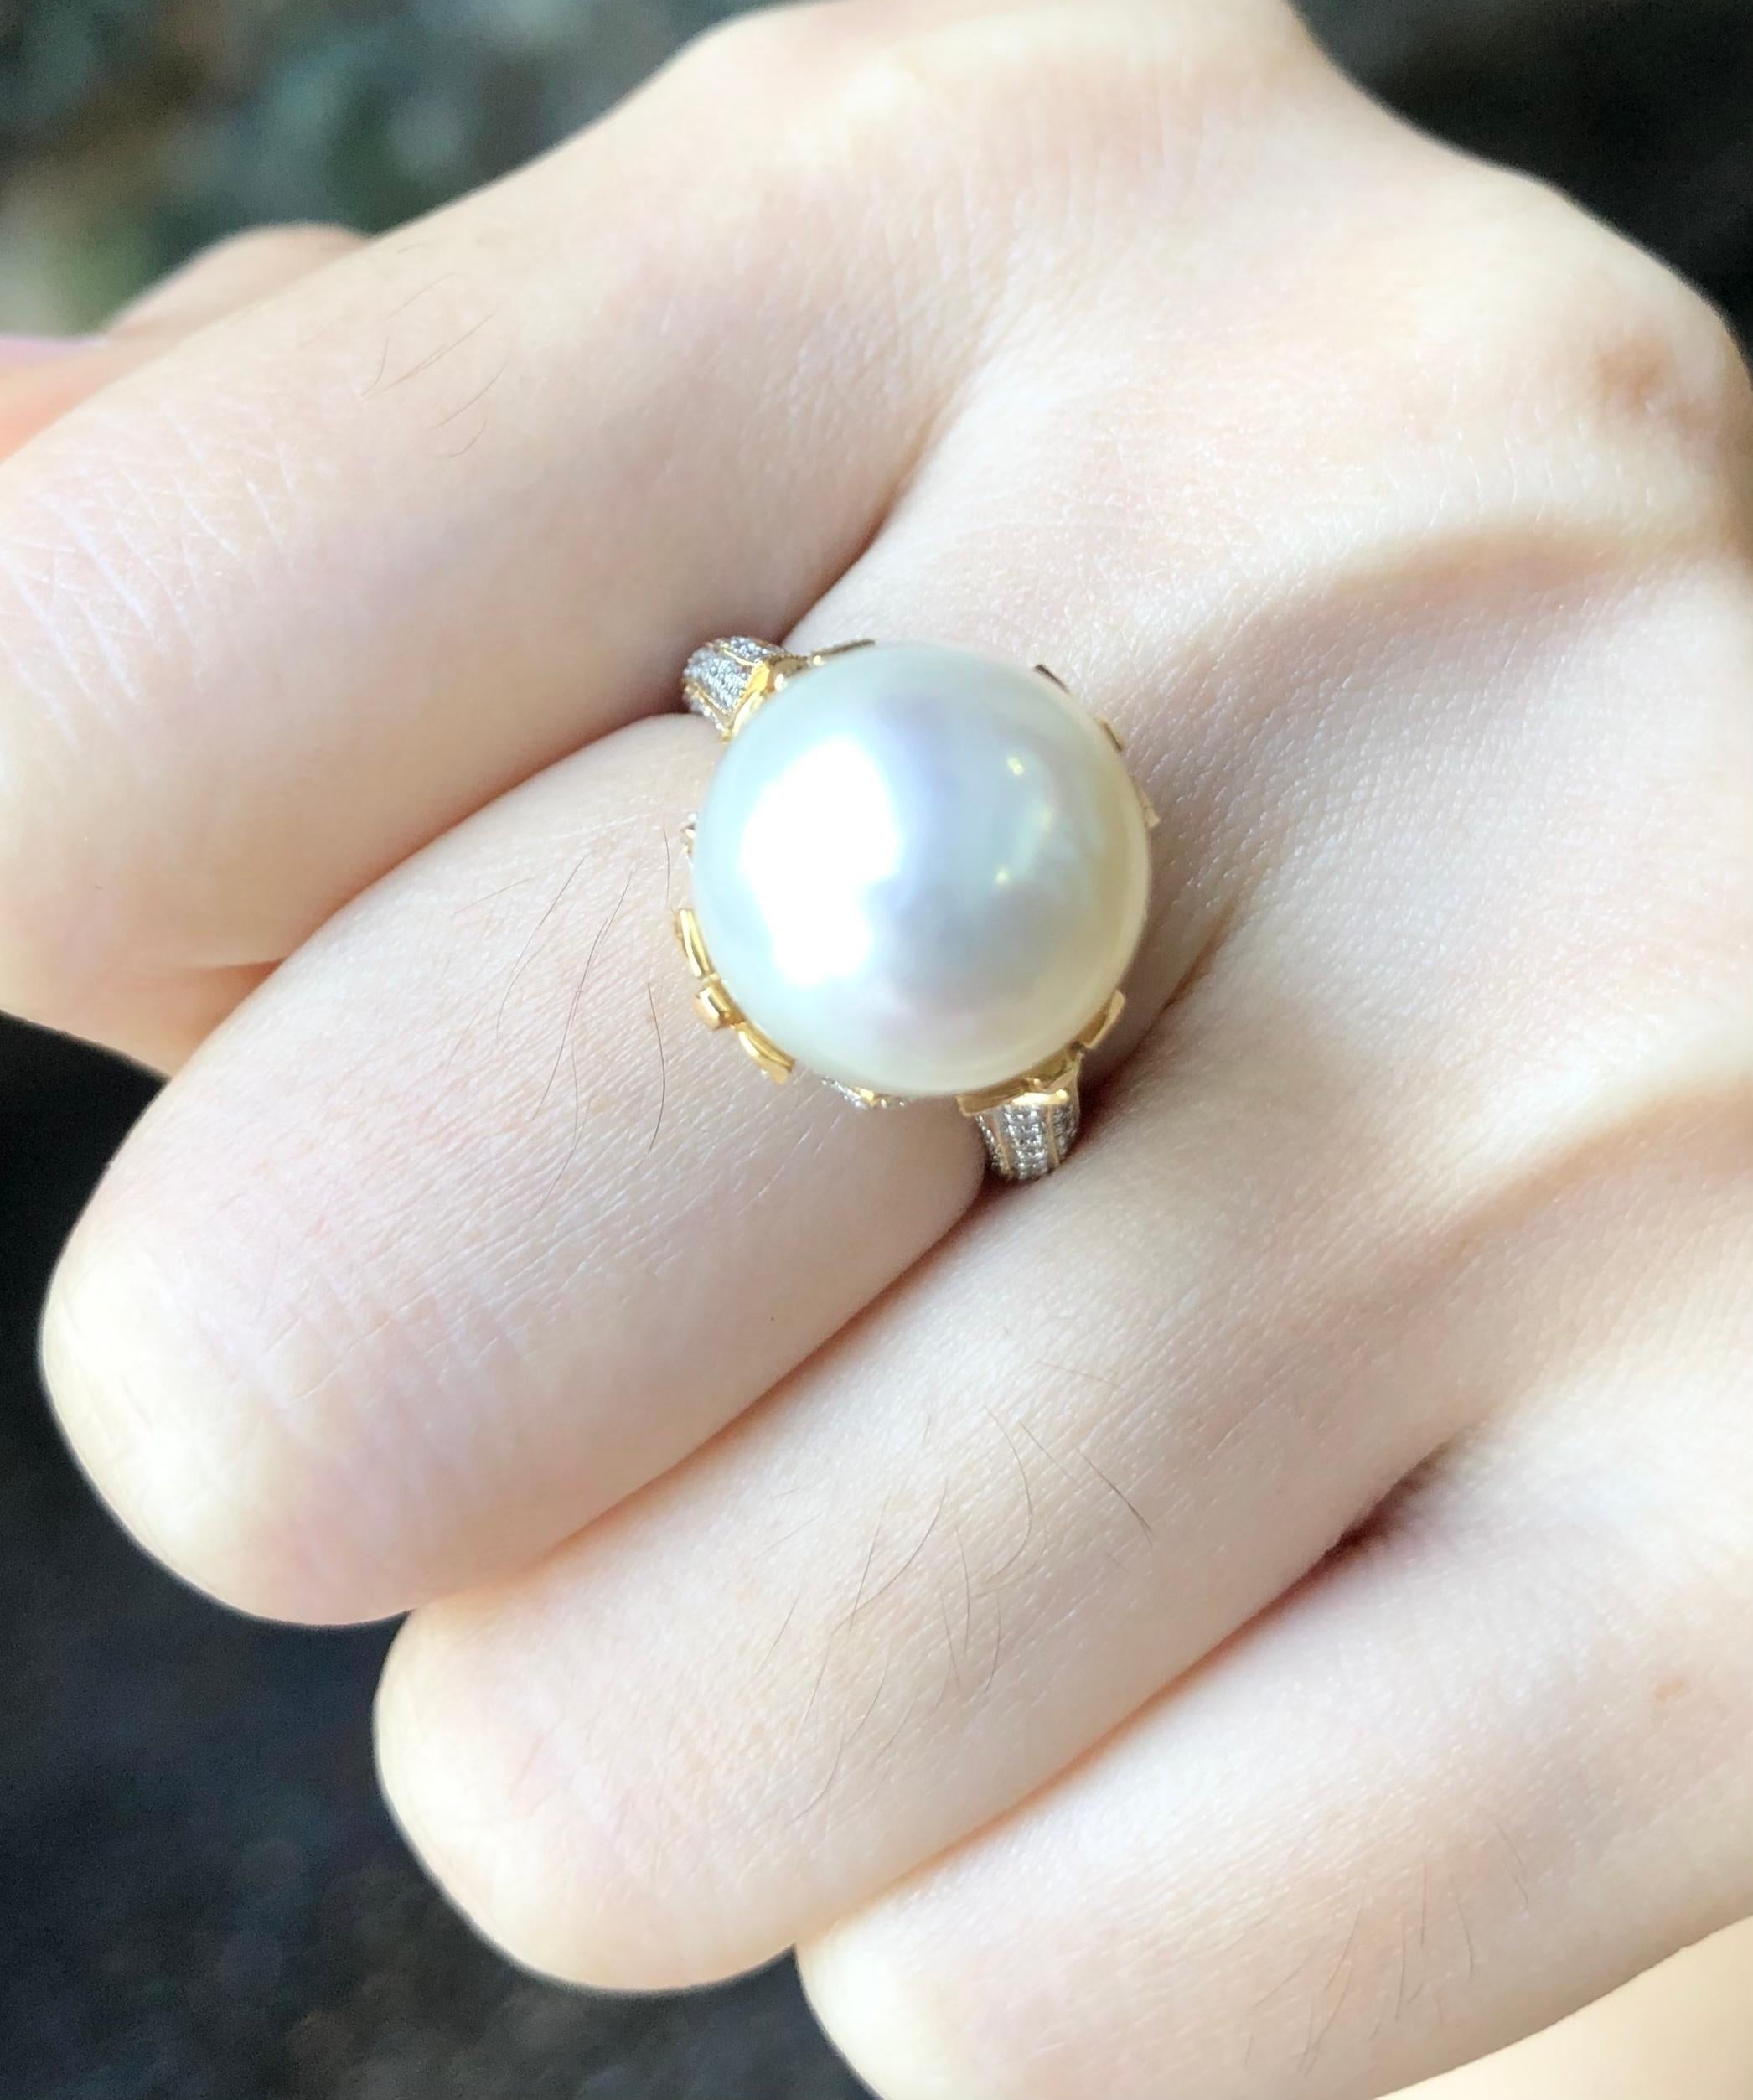 Pearl with Diamond 0.80 carat  Ring set in 18 Karat Gold Settings

Width:  1.3 cm 
Length: 1.3 cm
Ring Size: 51
Total Weight: 8.83 grams

Pearl: 11.8 mm

